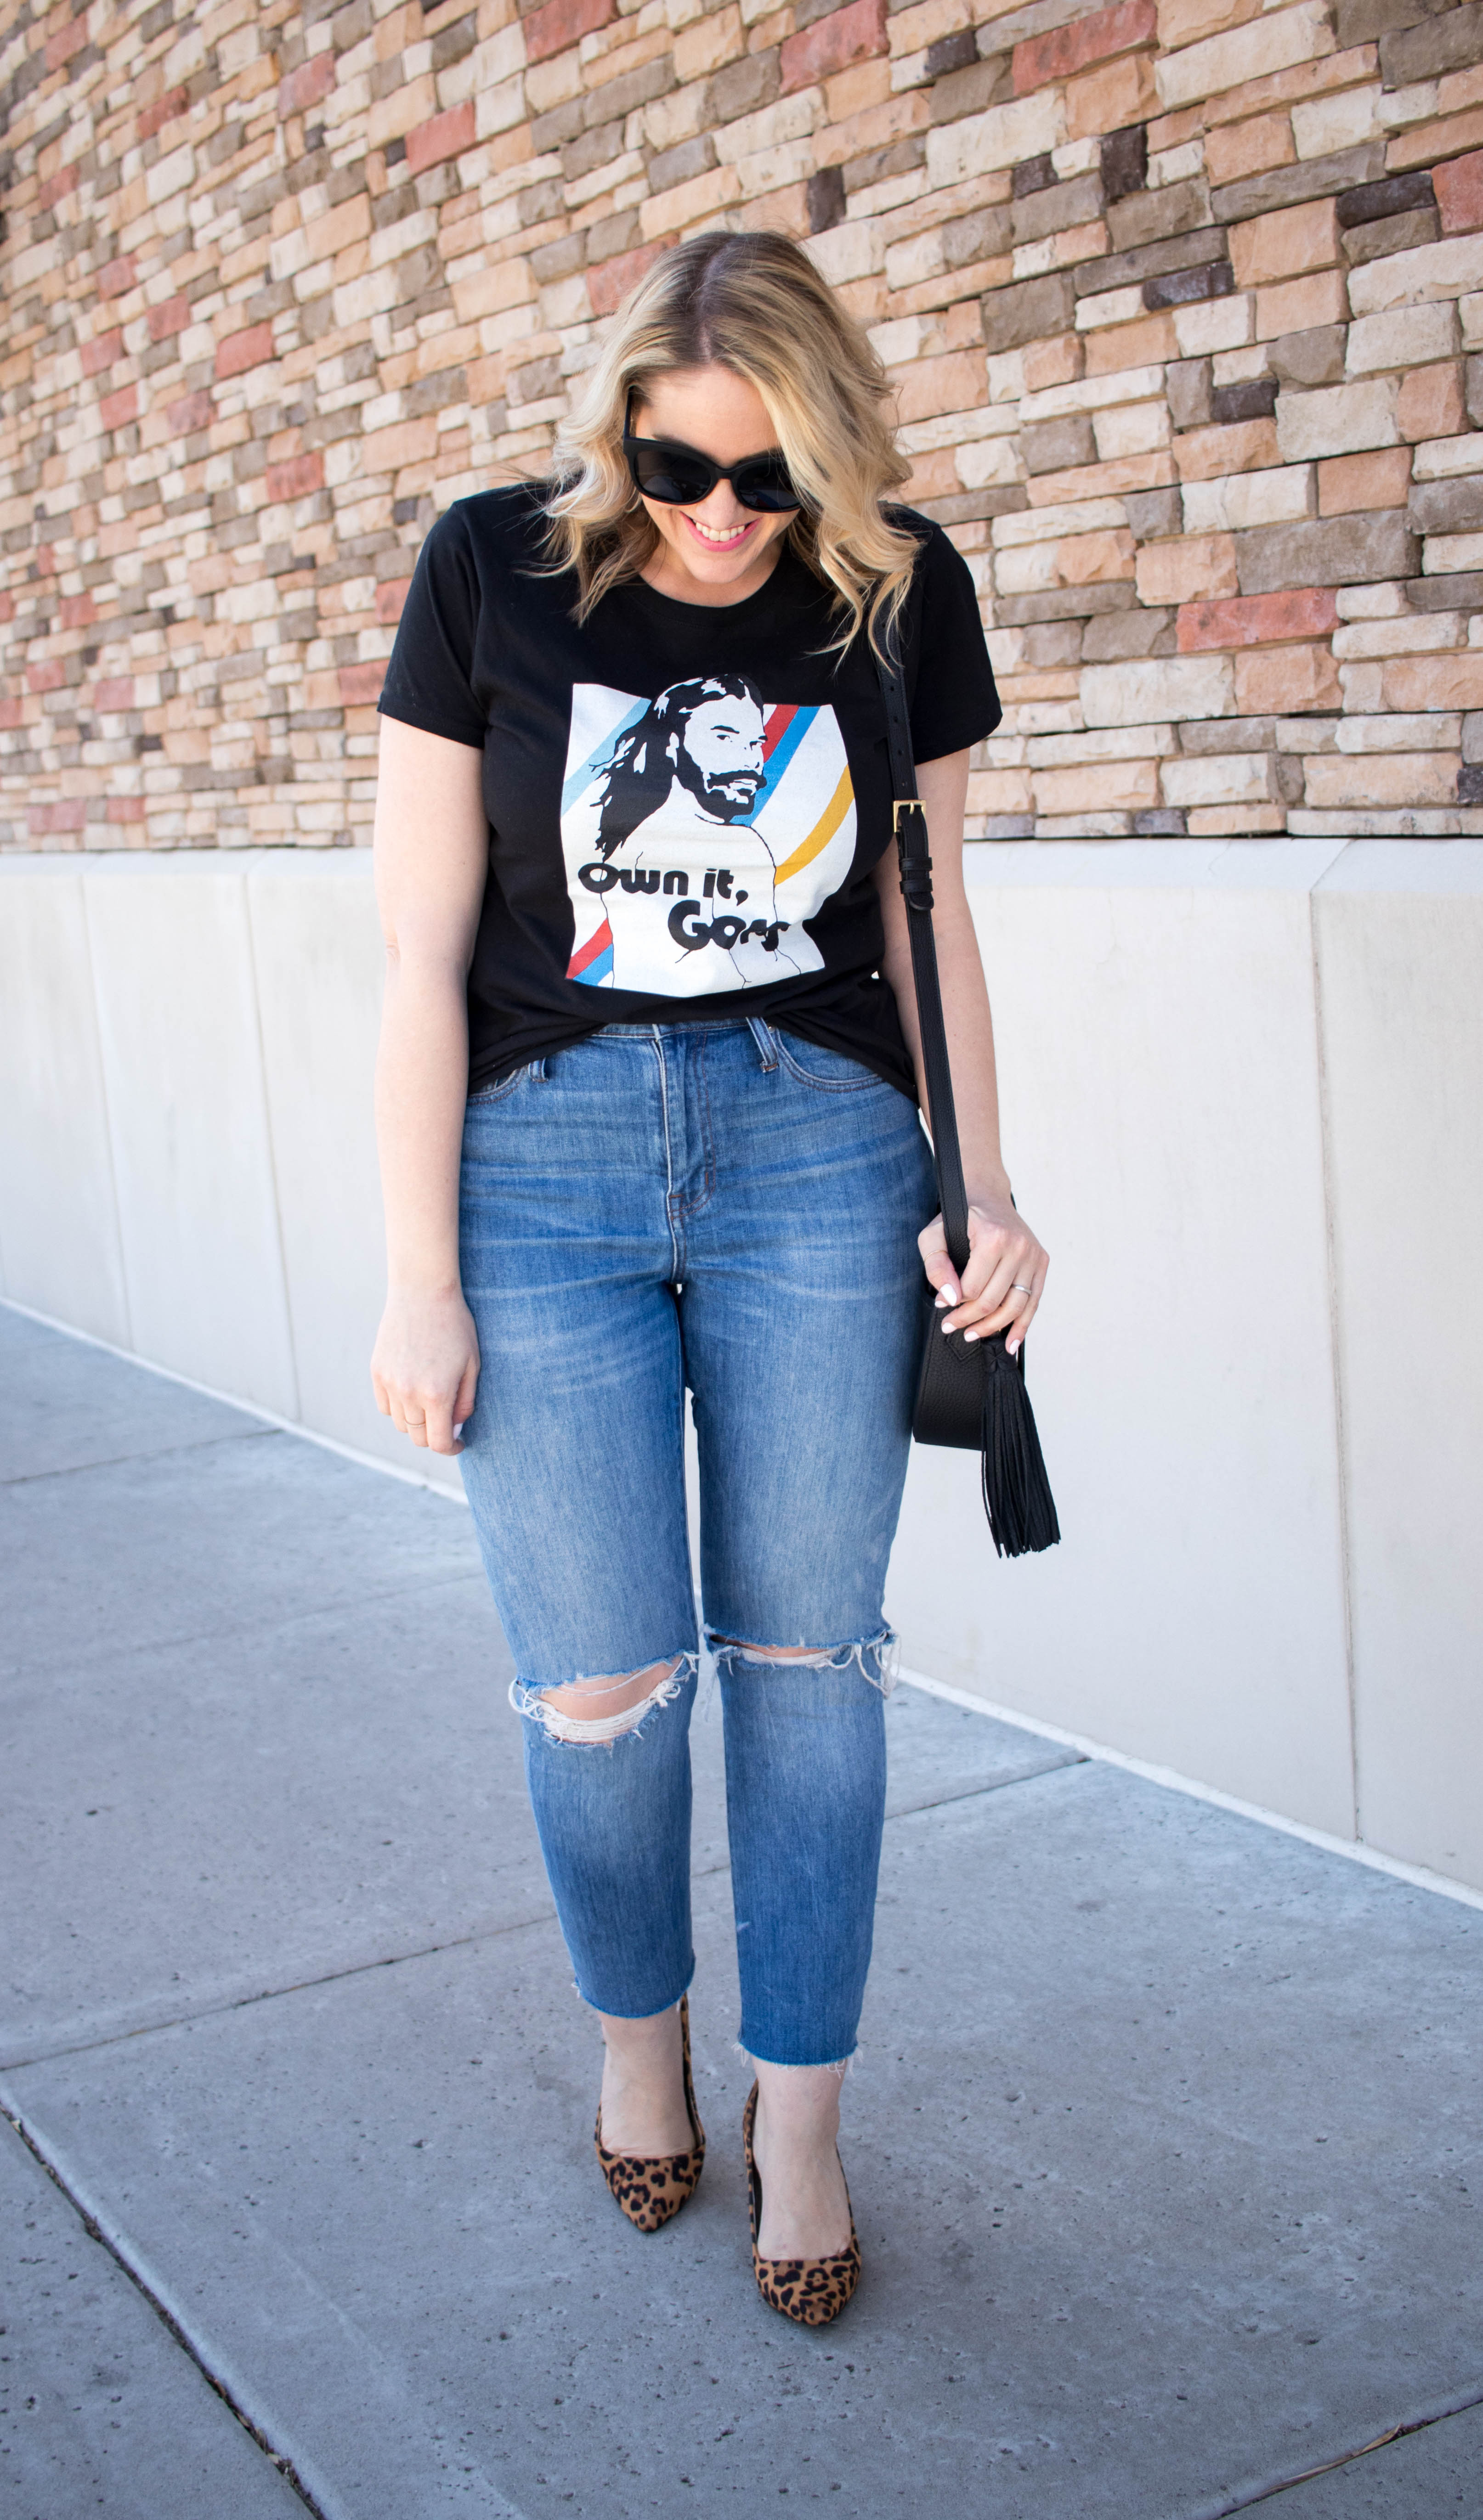 graphic tee and boyfriend jeans outfit #leoaprdheels #boyfriendjeansoutfit #graphictee